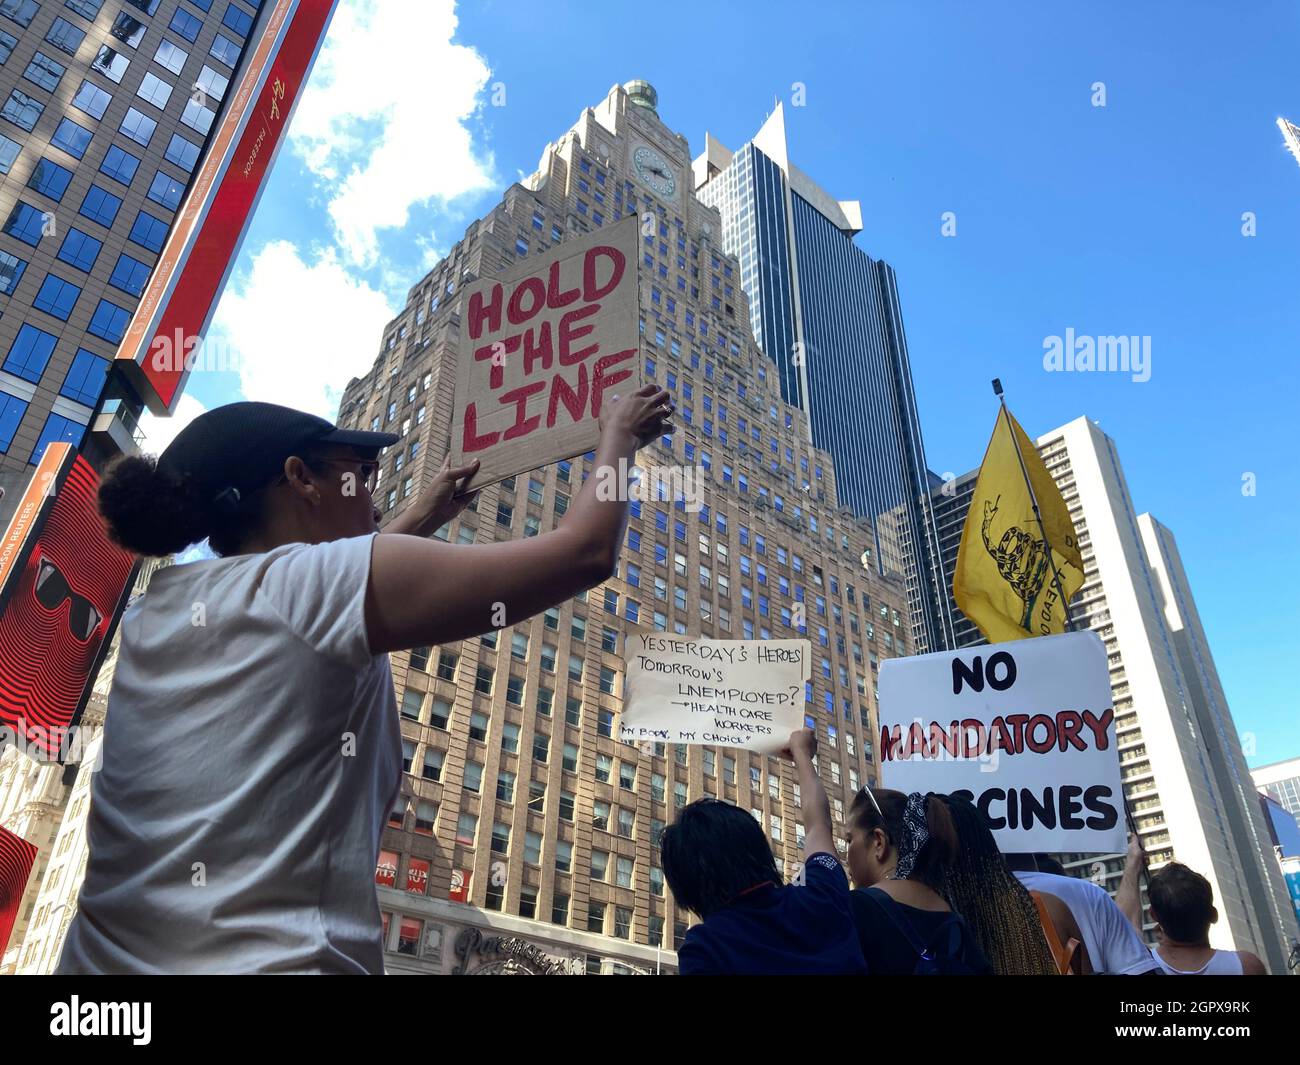 Protesters gather in Times Square in New York on Saturday, September 18, 2021 to rally against Covid-19 vaccinations. (© Frances M. Roberts) Stock Photo